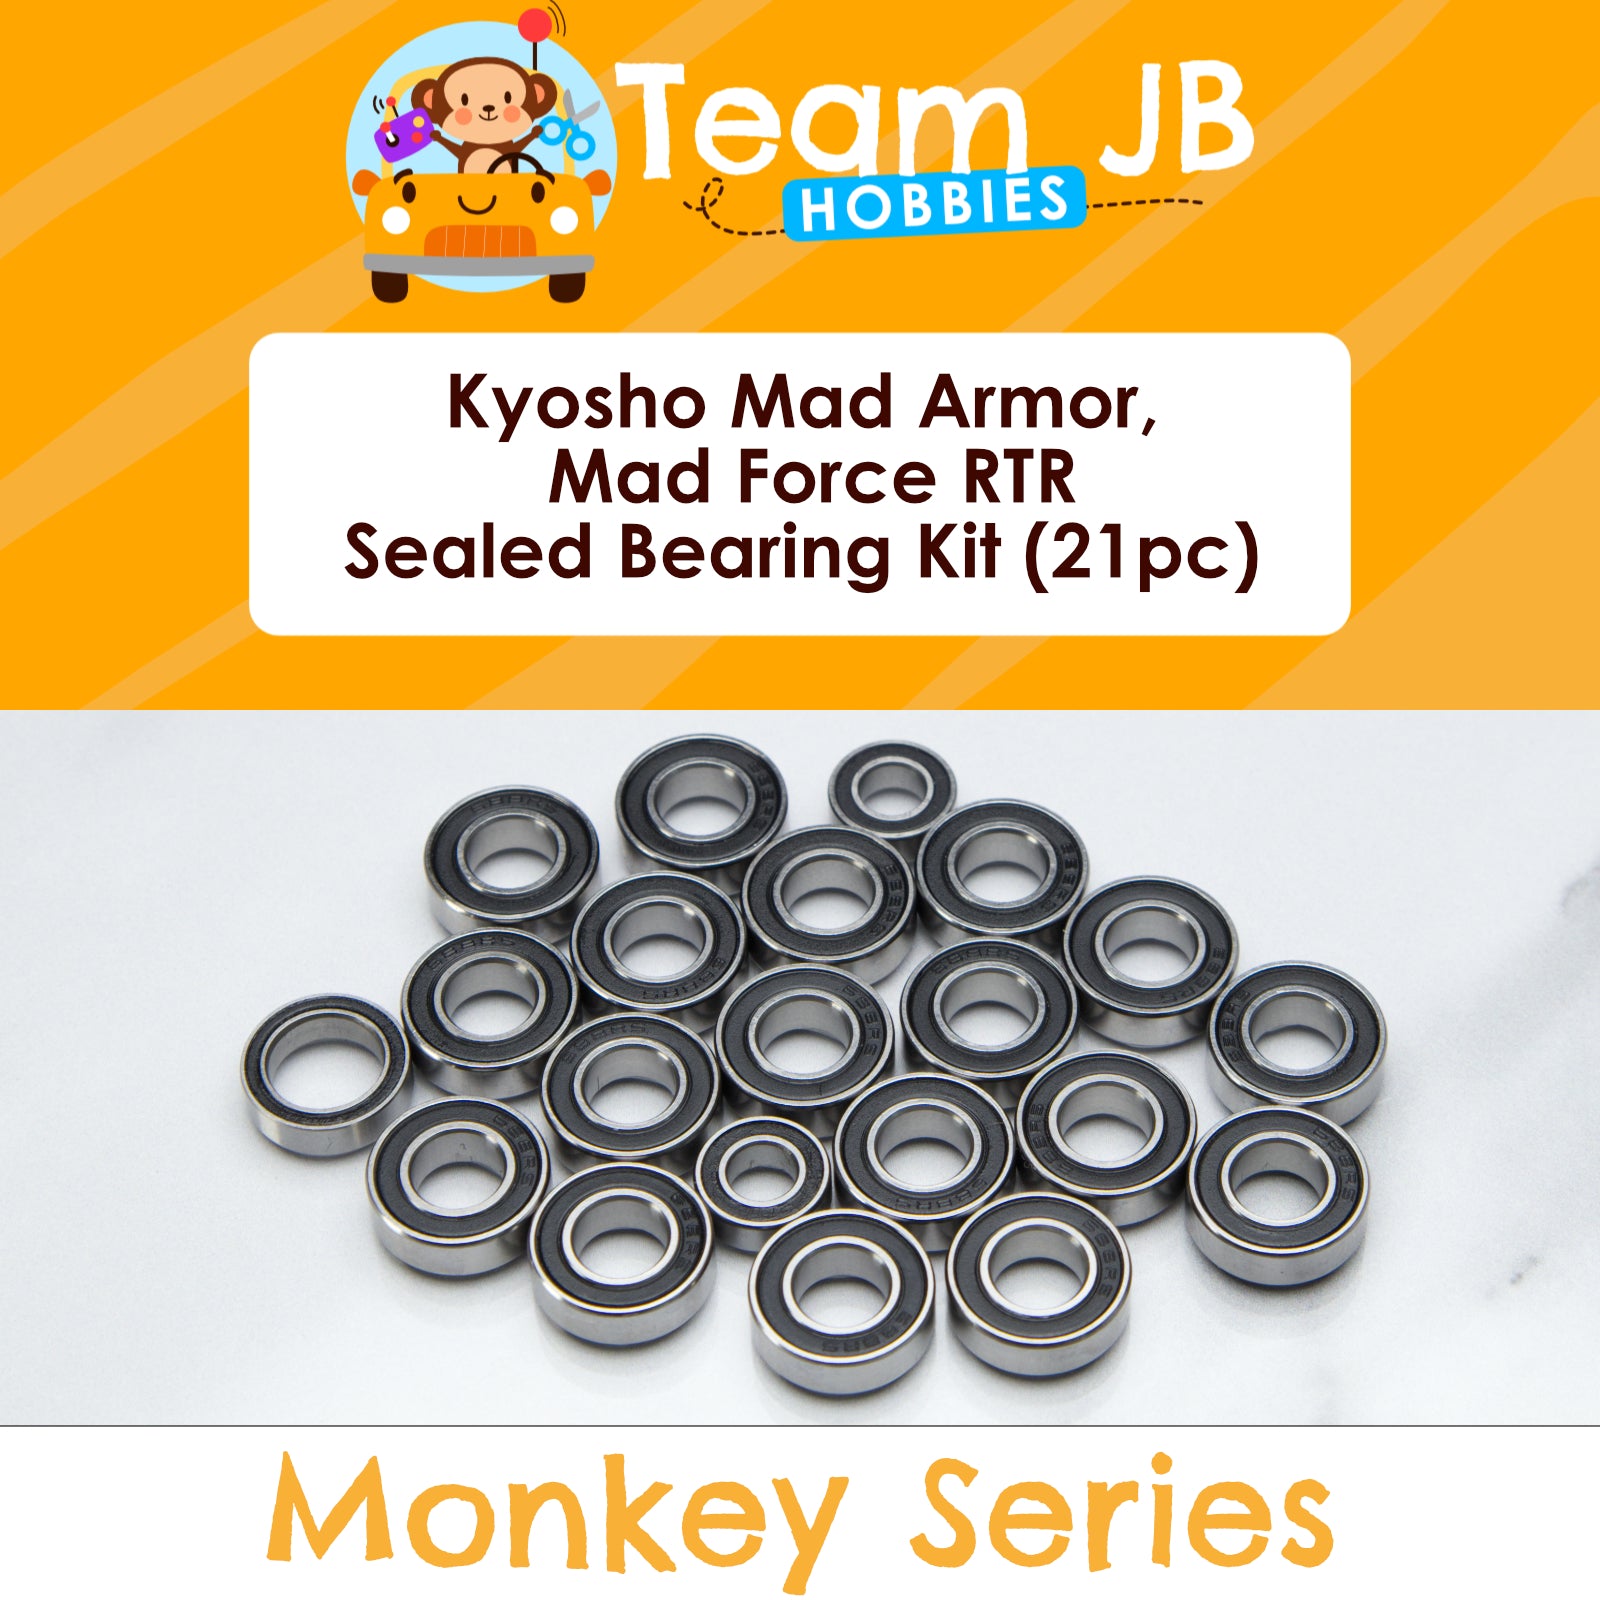 Kyosho Mad Armor, Mad Force RTR - Sealed Bearing Kit